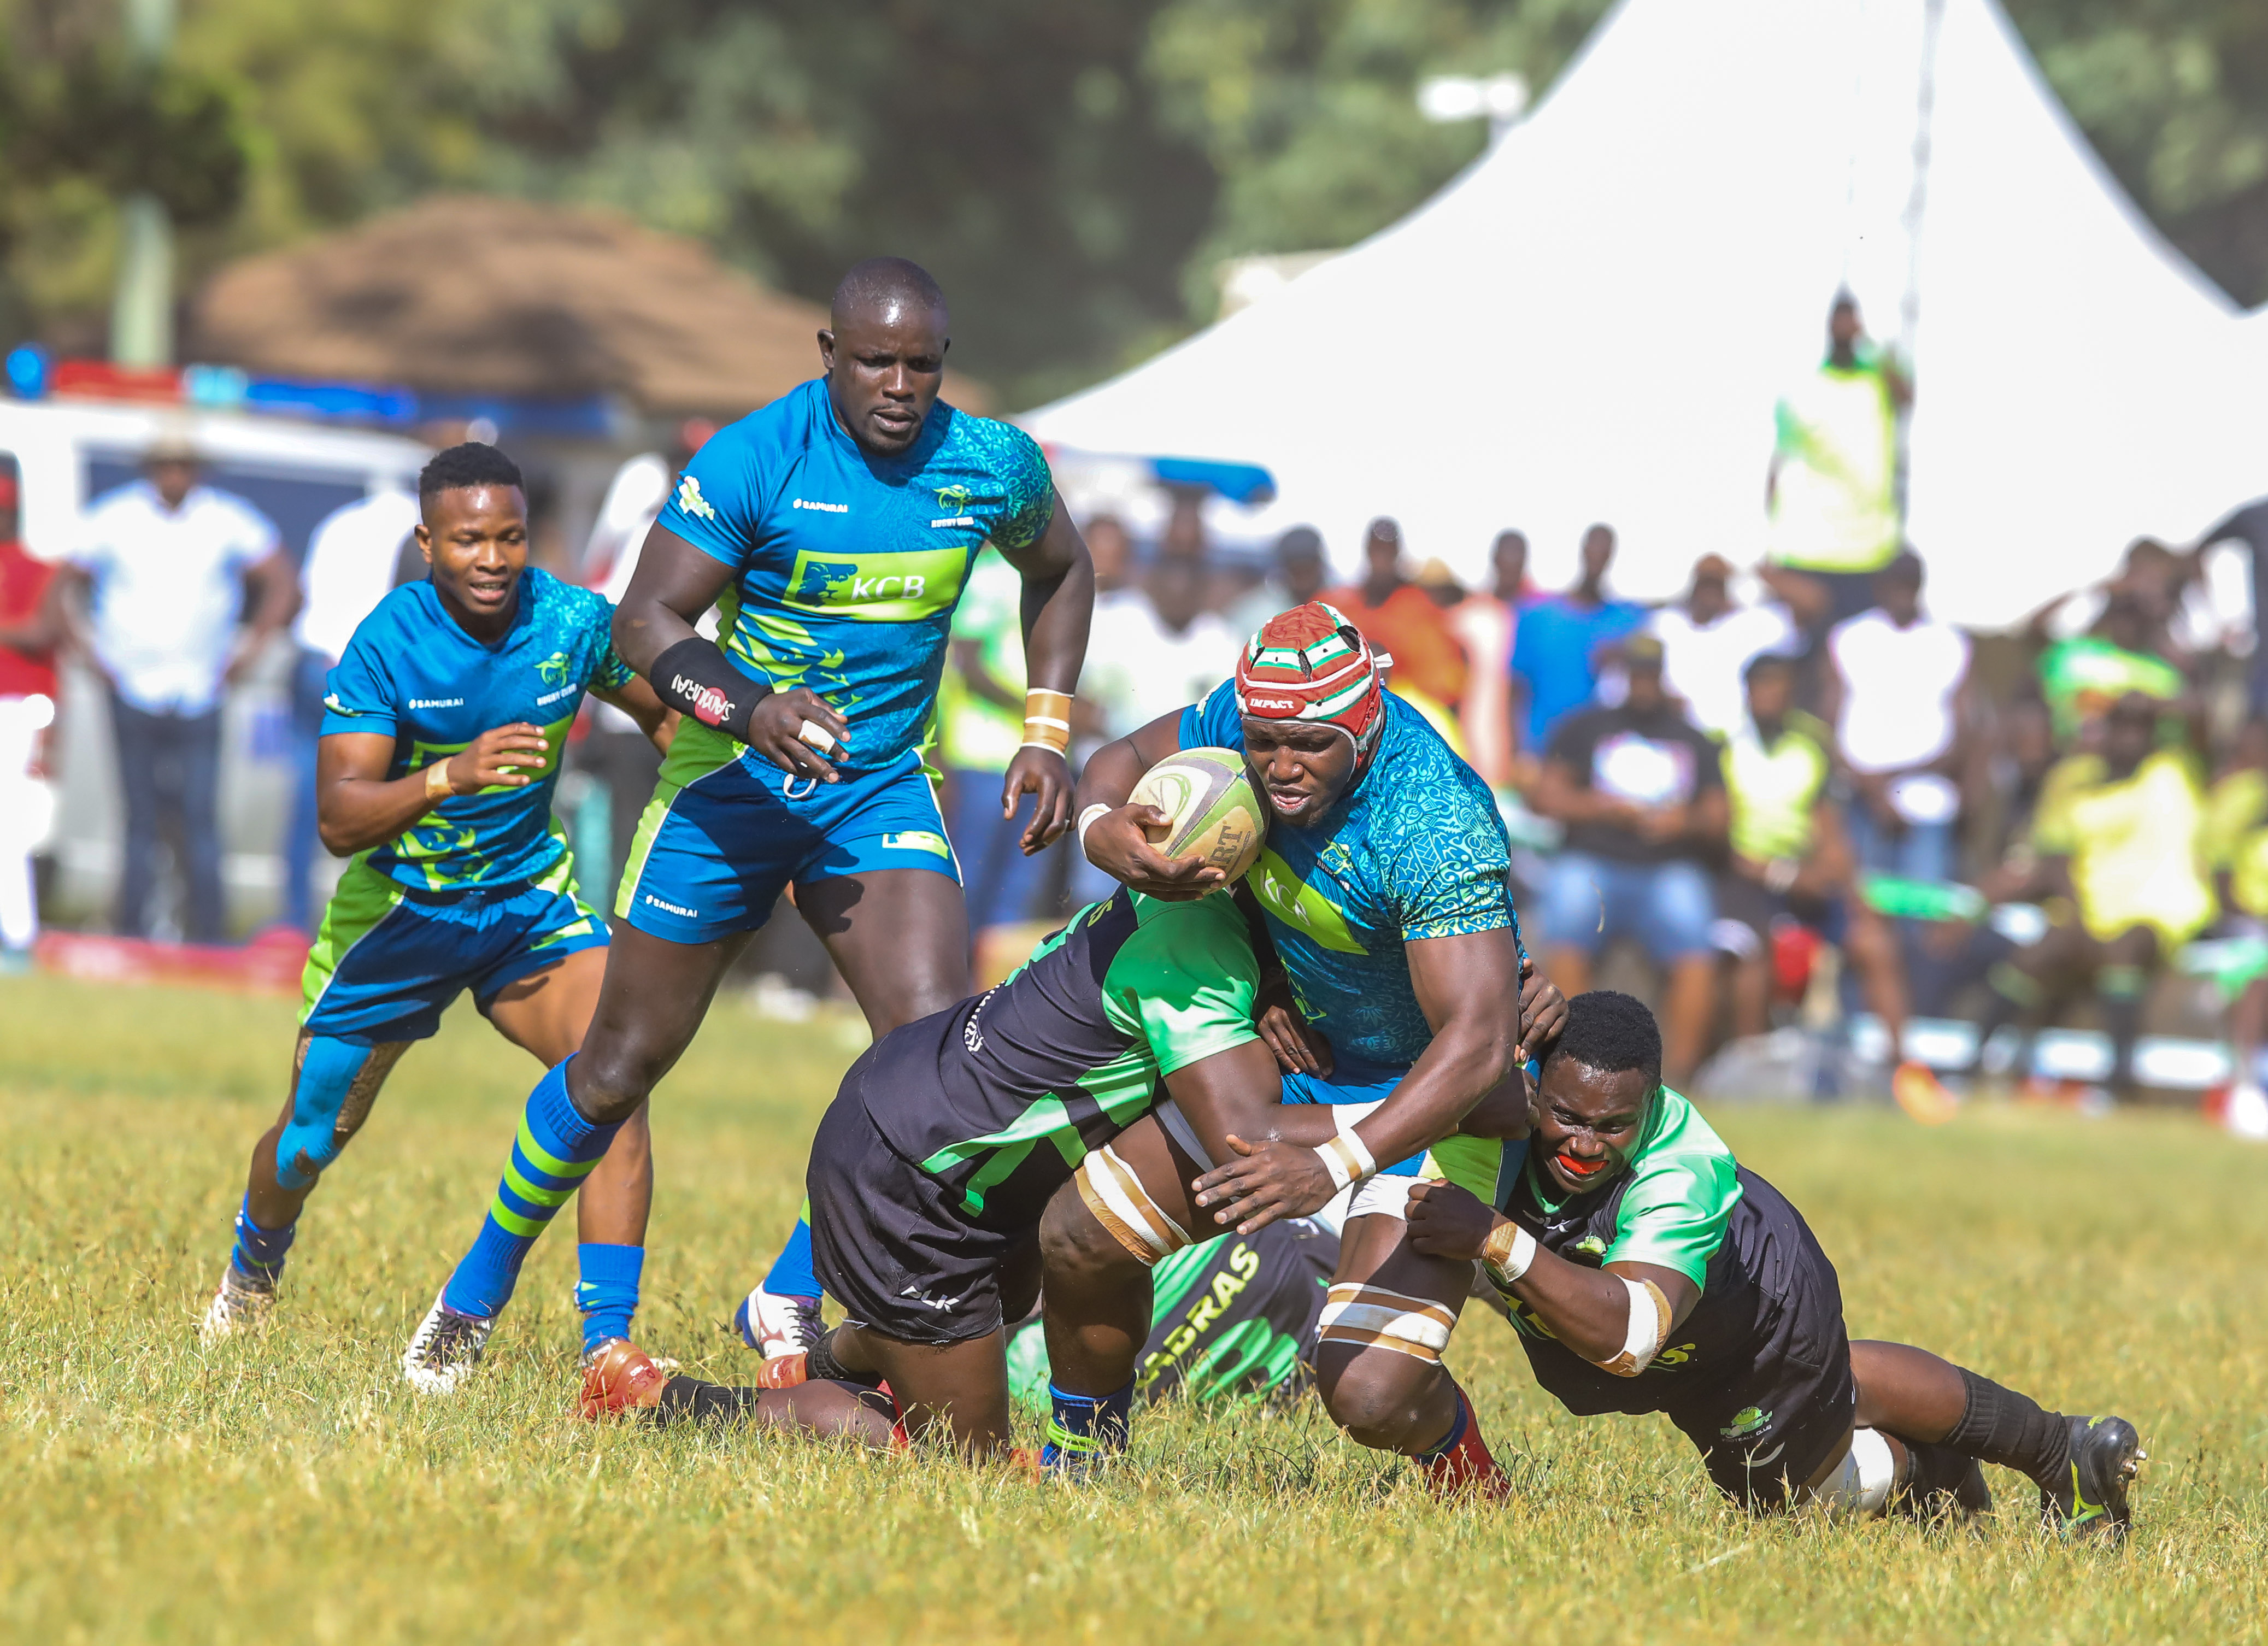 Kcb Rfc Shifts Focus To Enterprise Cup After Kenya Cup Loss